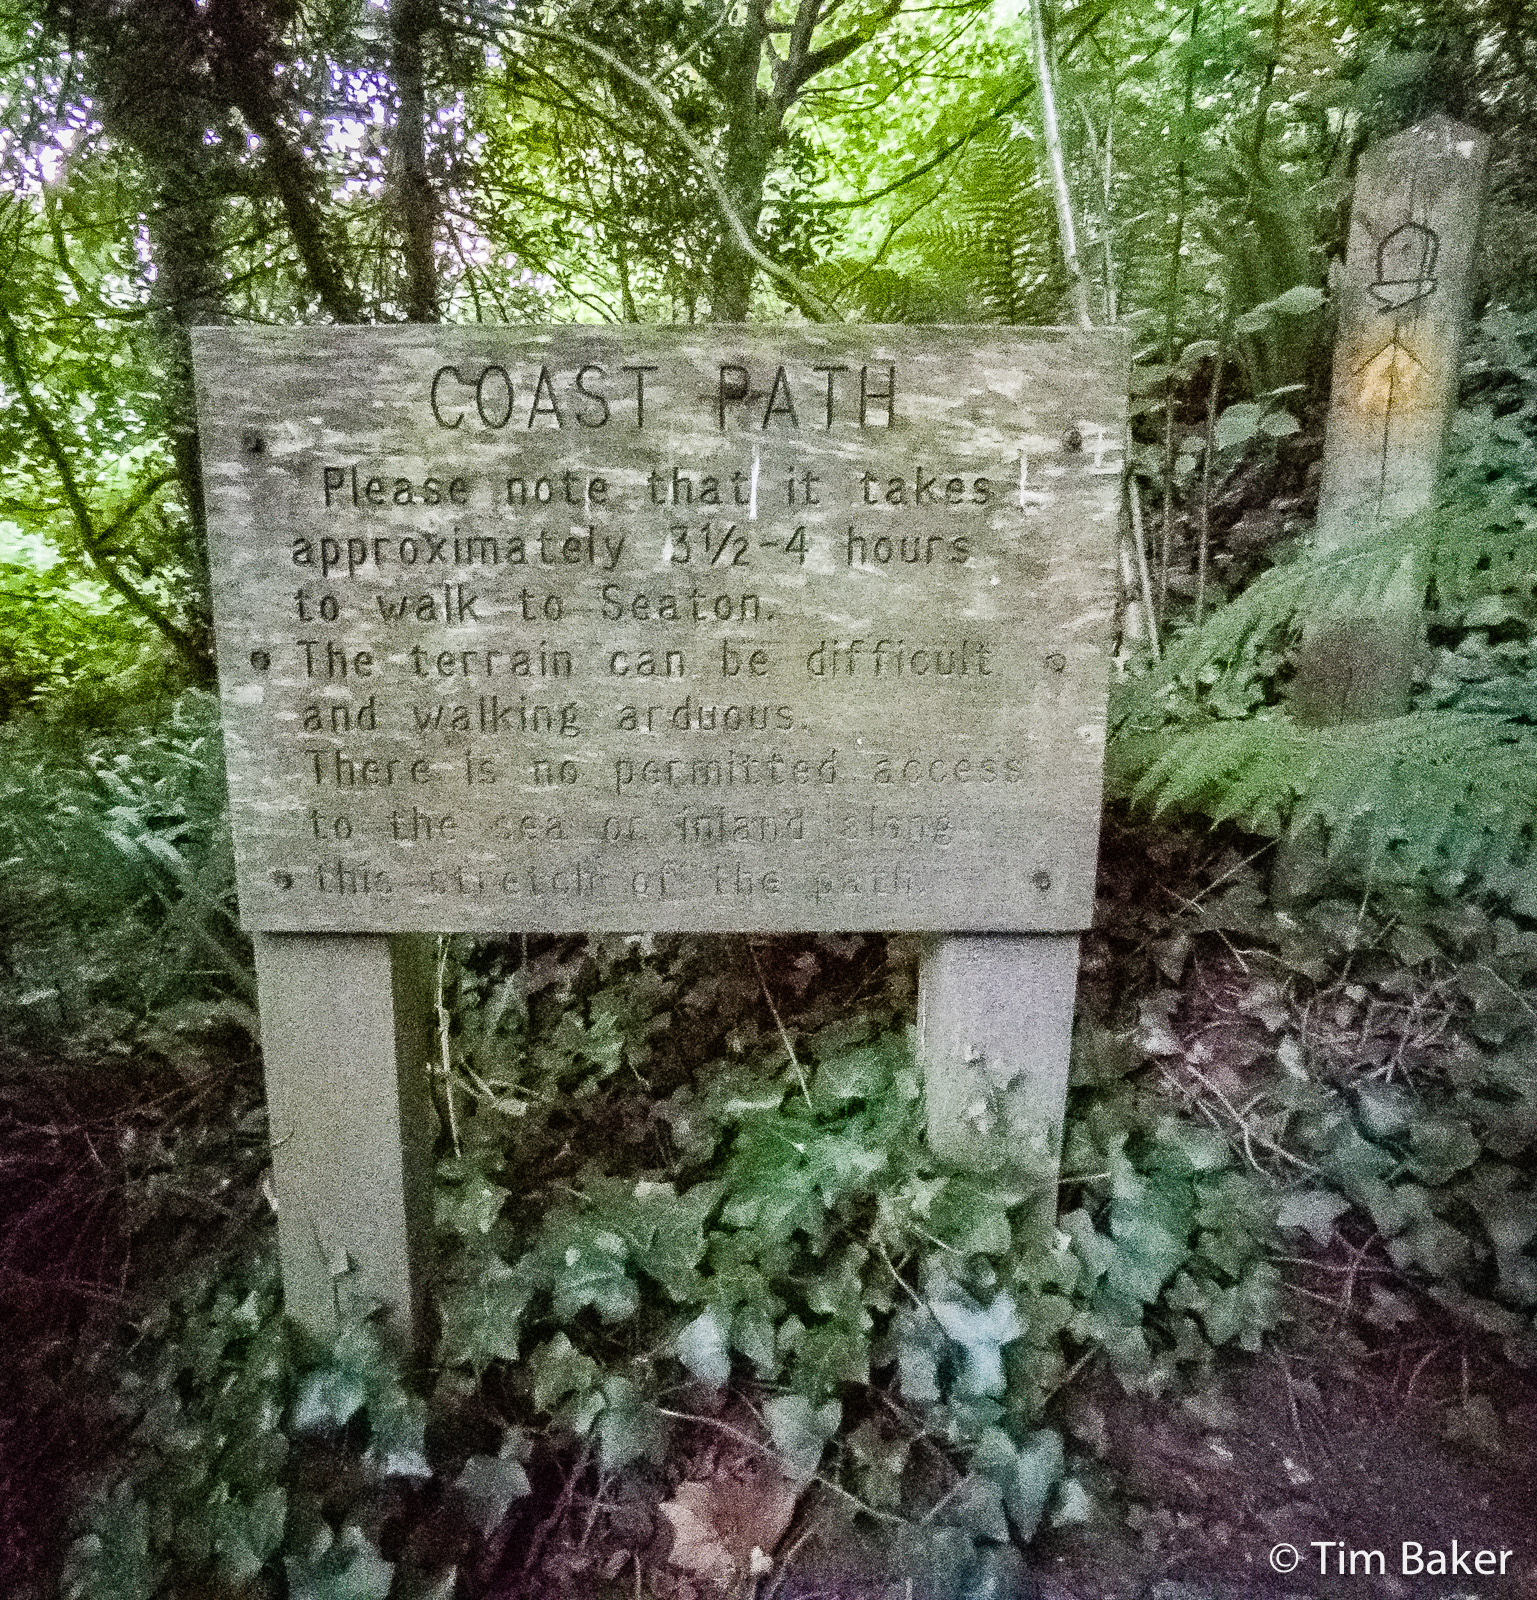 The Sign warning you of ' 'difficult..,terrain and arduous walking' and no exits at Axmouth to Lyme Regis Undercliffs. IT LIES.